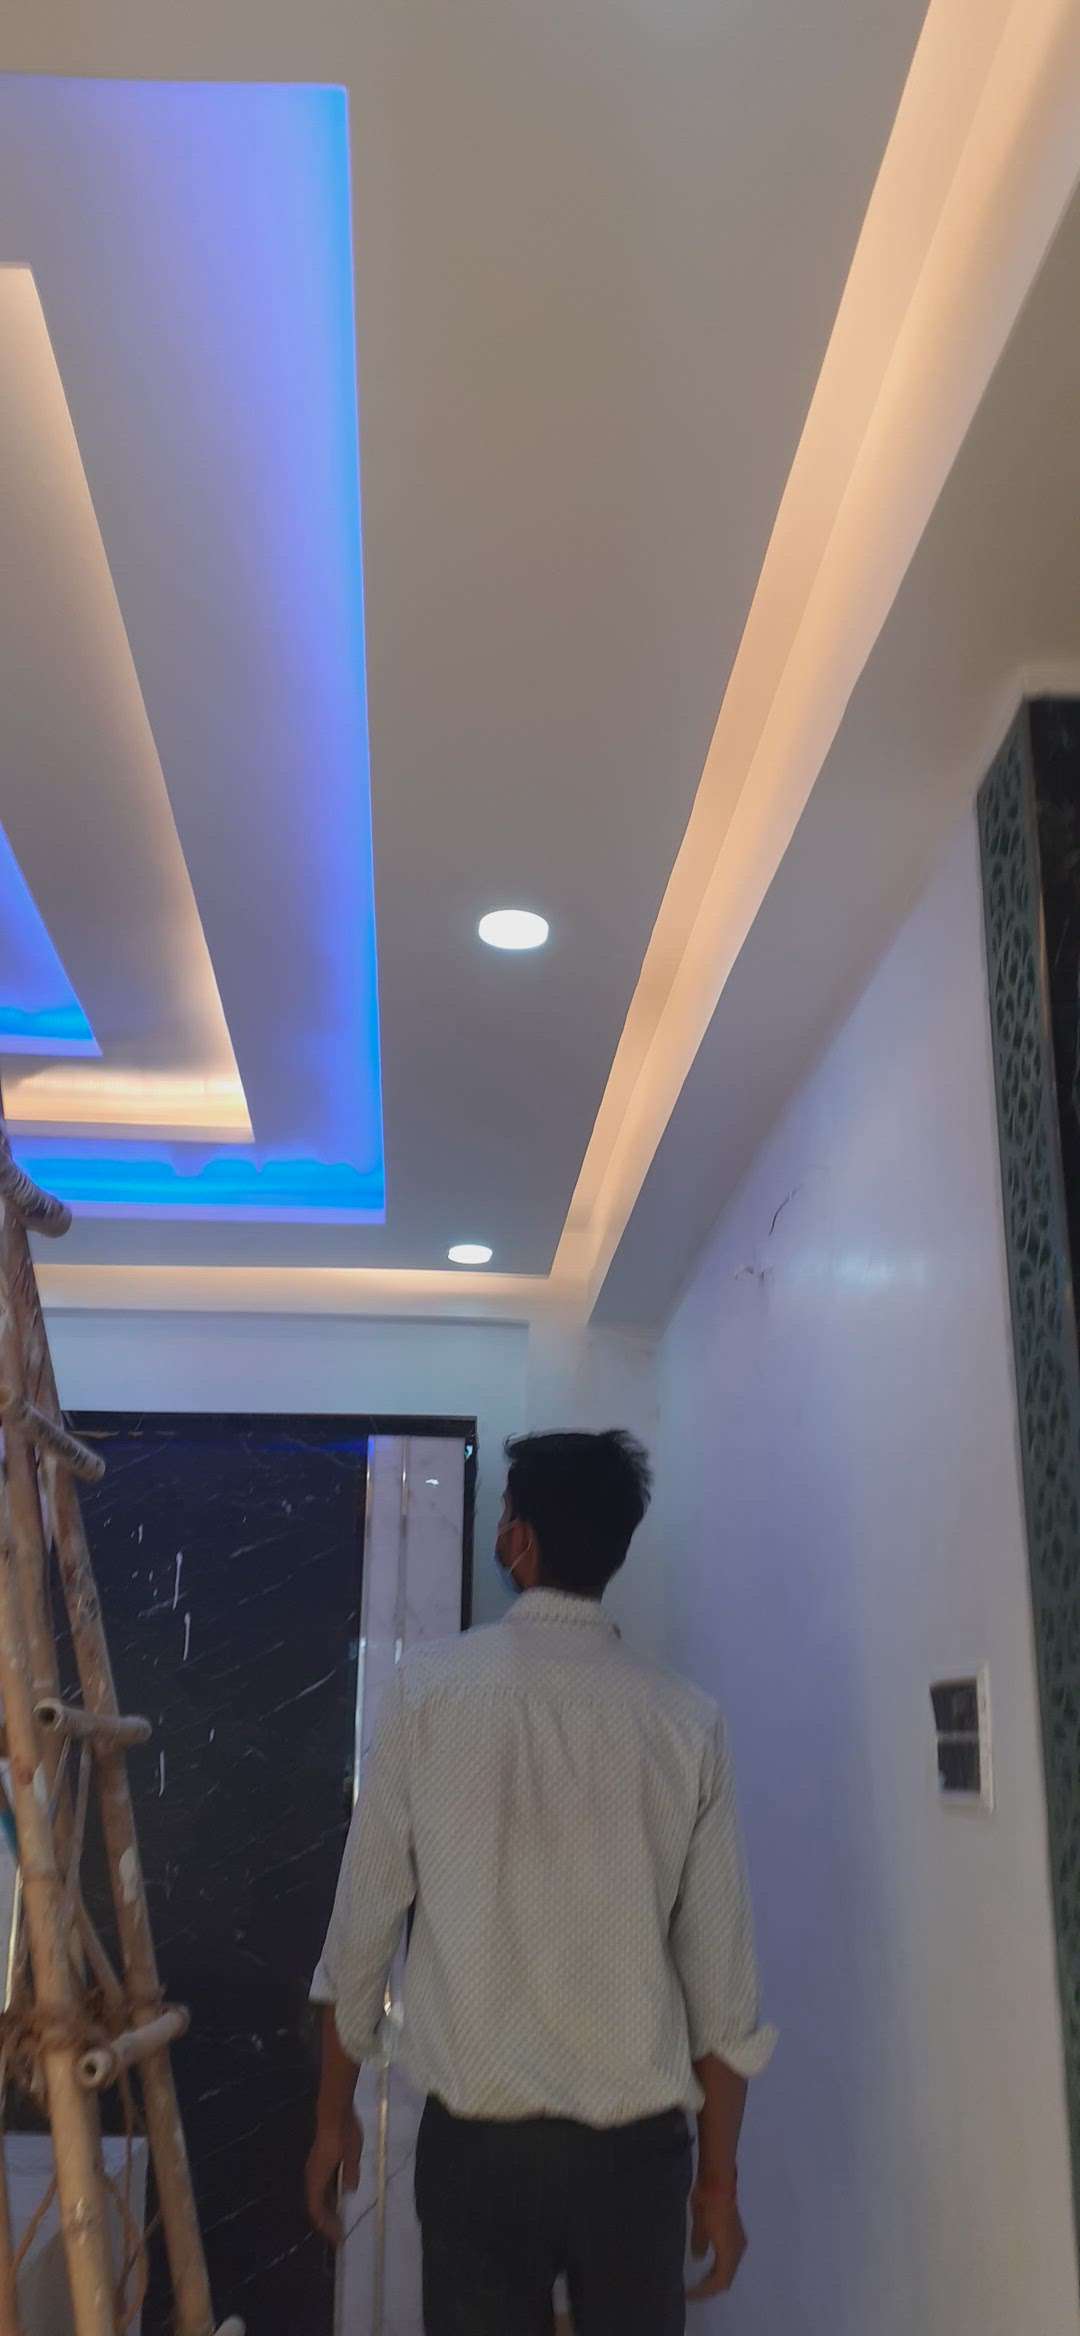 Hello sir 
I'm Architect & Interior designer. We design your Home in a modern look. we provid full interior service.
We talk with the Drawings.
If u intrested sir, call me & WhatsApp 7983335735
Fusion interior 
#interiordesign #interiordesigner #BedroomDesigns  #BedroomDecor  #MasterBedroom  #LUXURY_BED  #bestinterior  #bedroomideas #interiør #architecture #Architect  #Entrance #InteriorDesigner #FalseCeiling #FalseCeiling_llighting_flooring